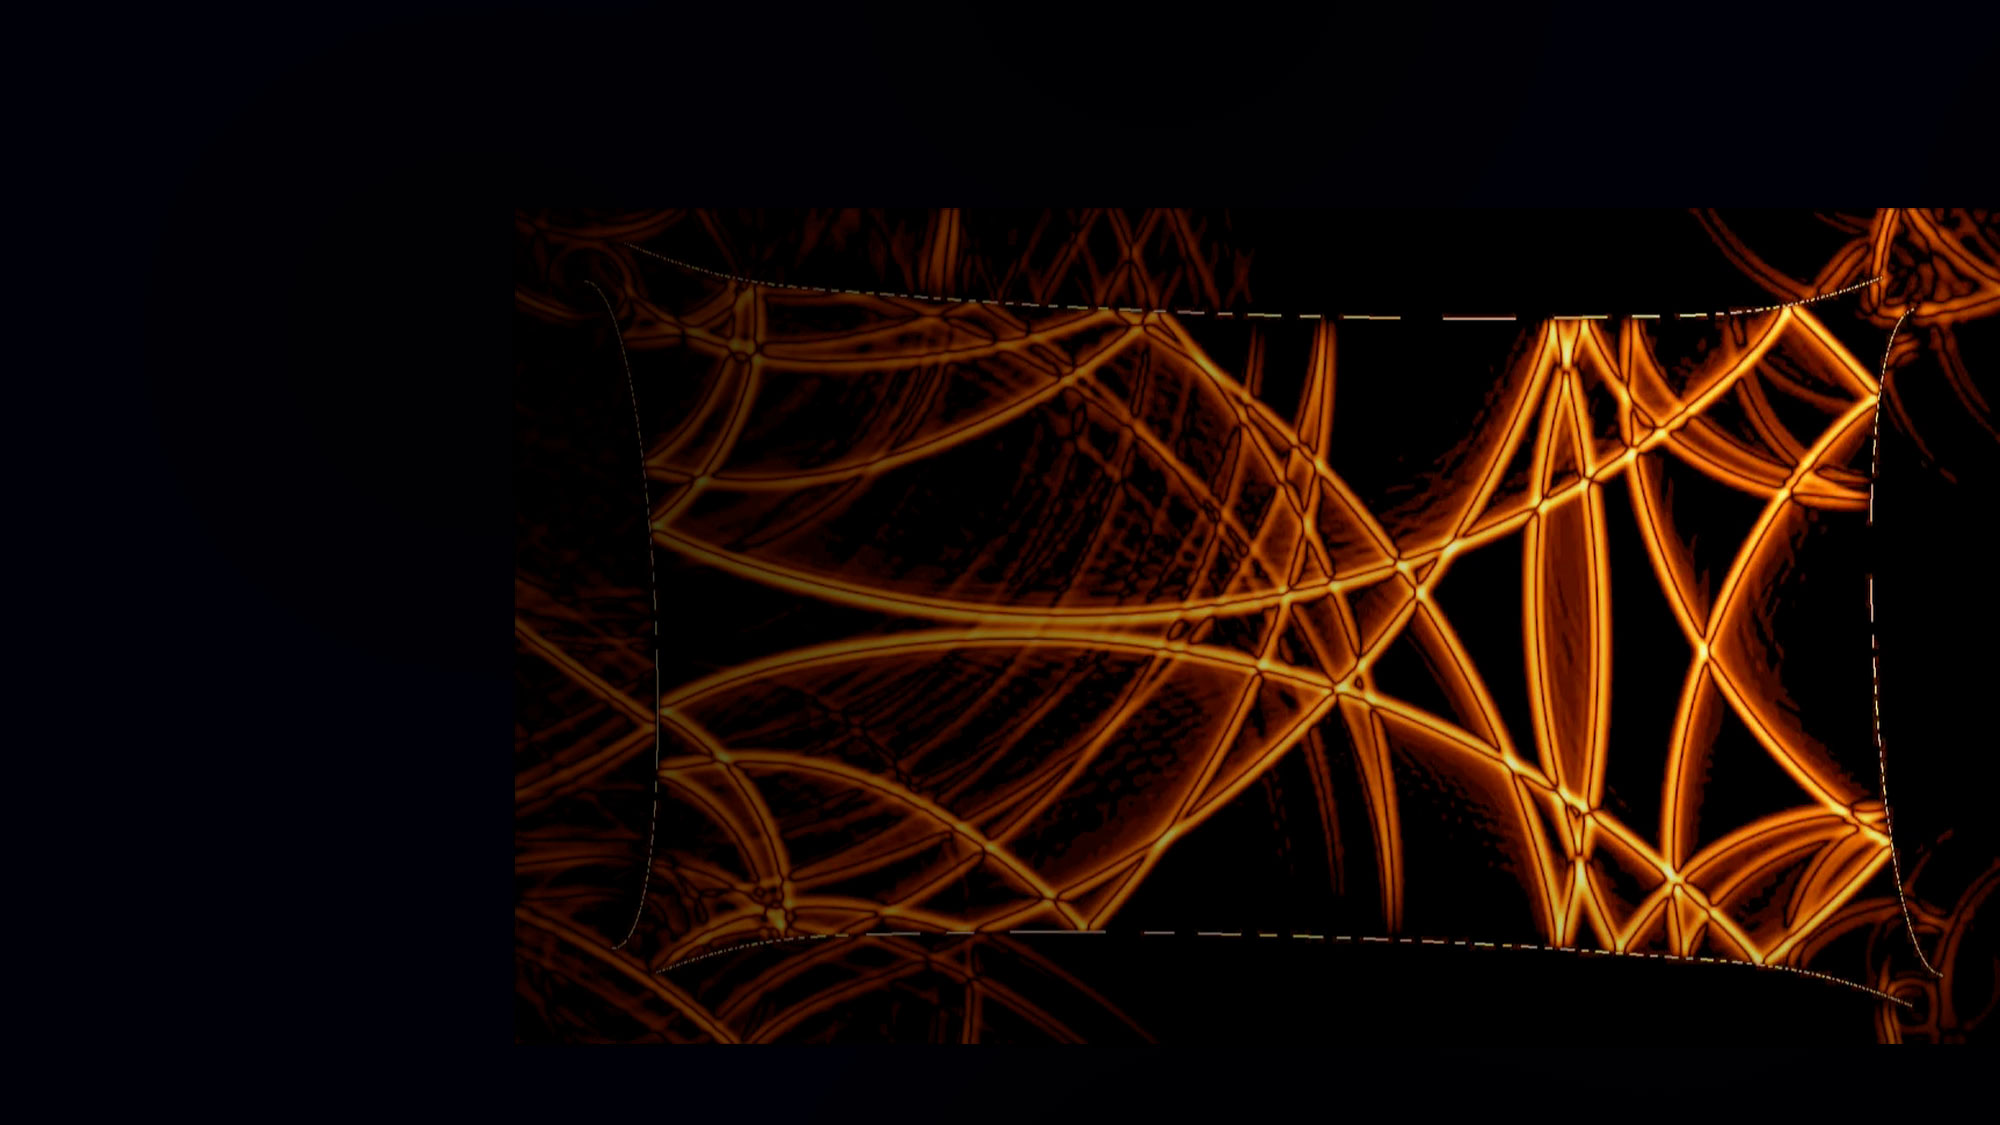 Abstract image of orange lines of light randomly placed among a black background. 